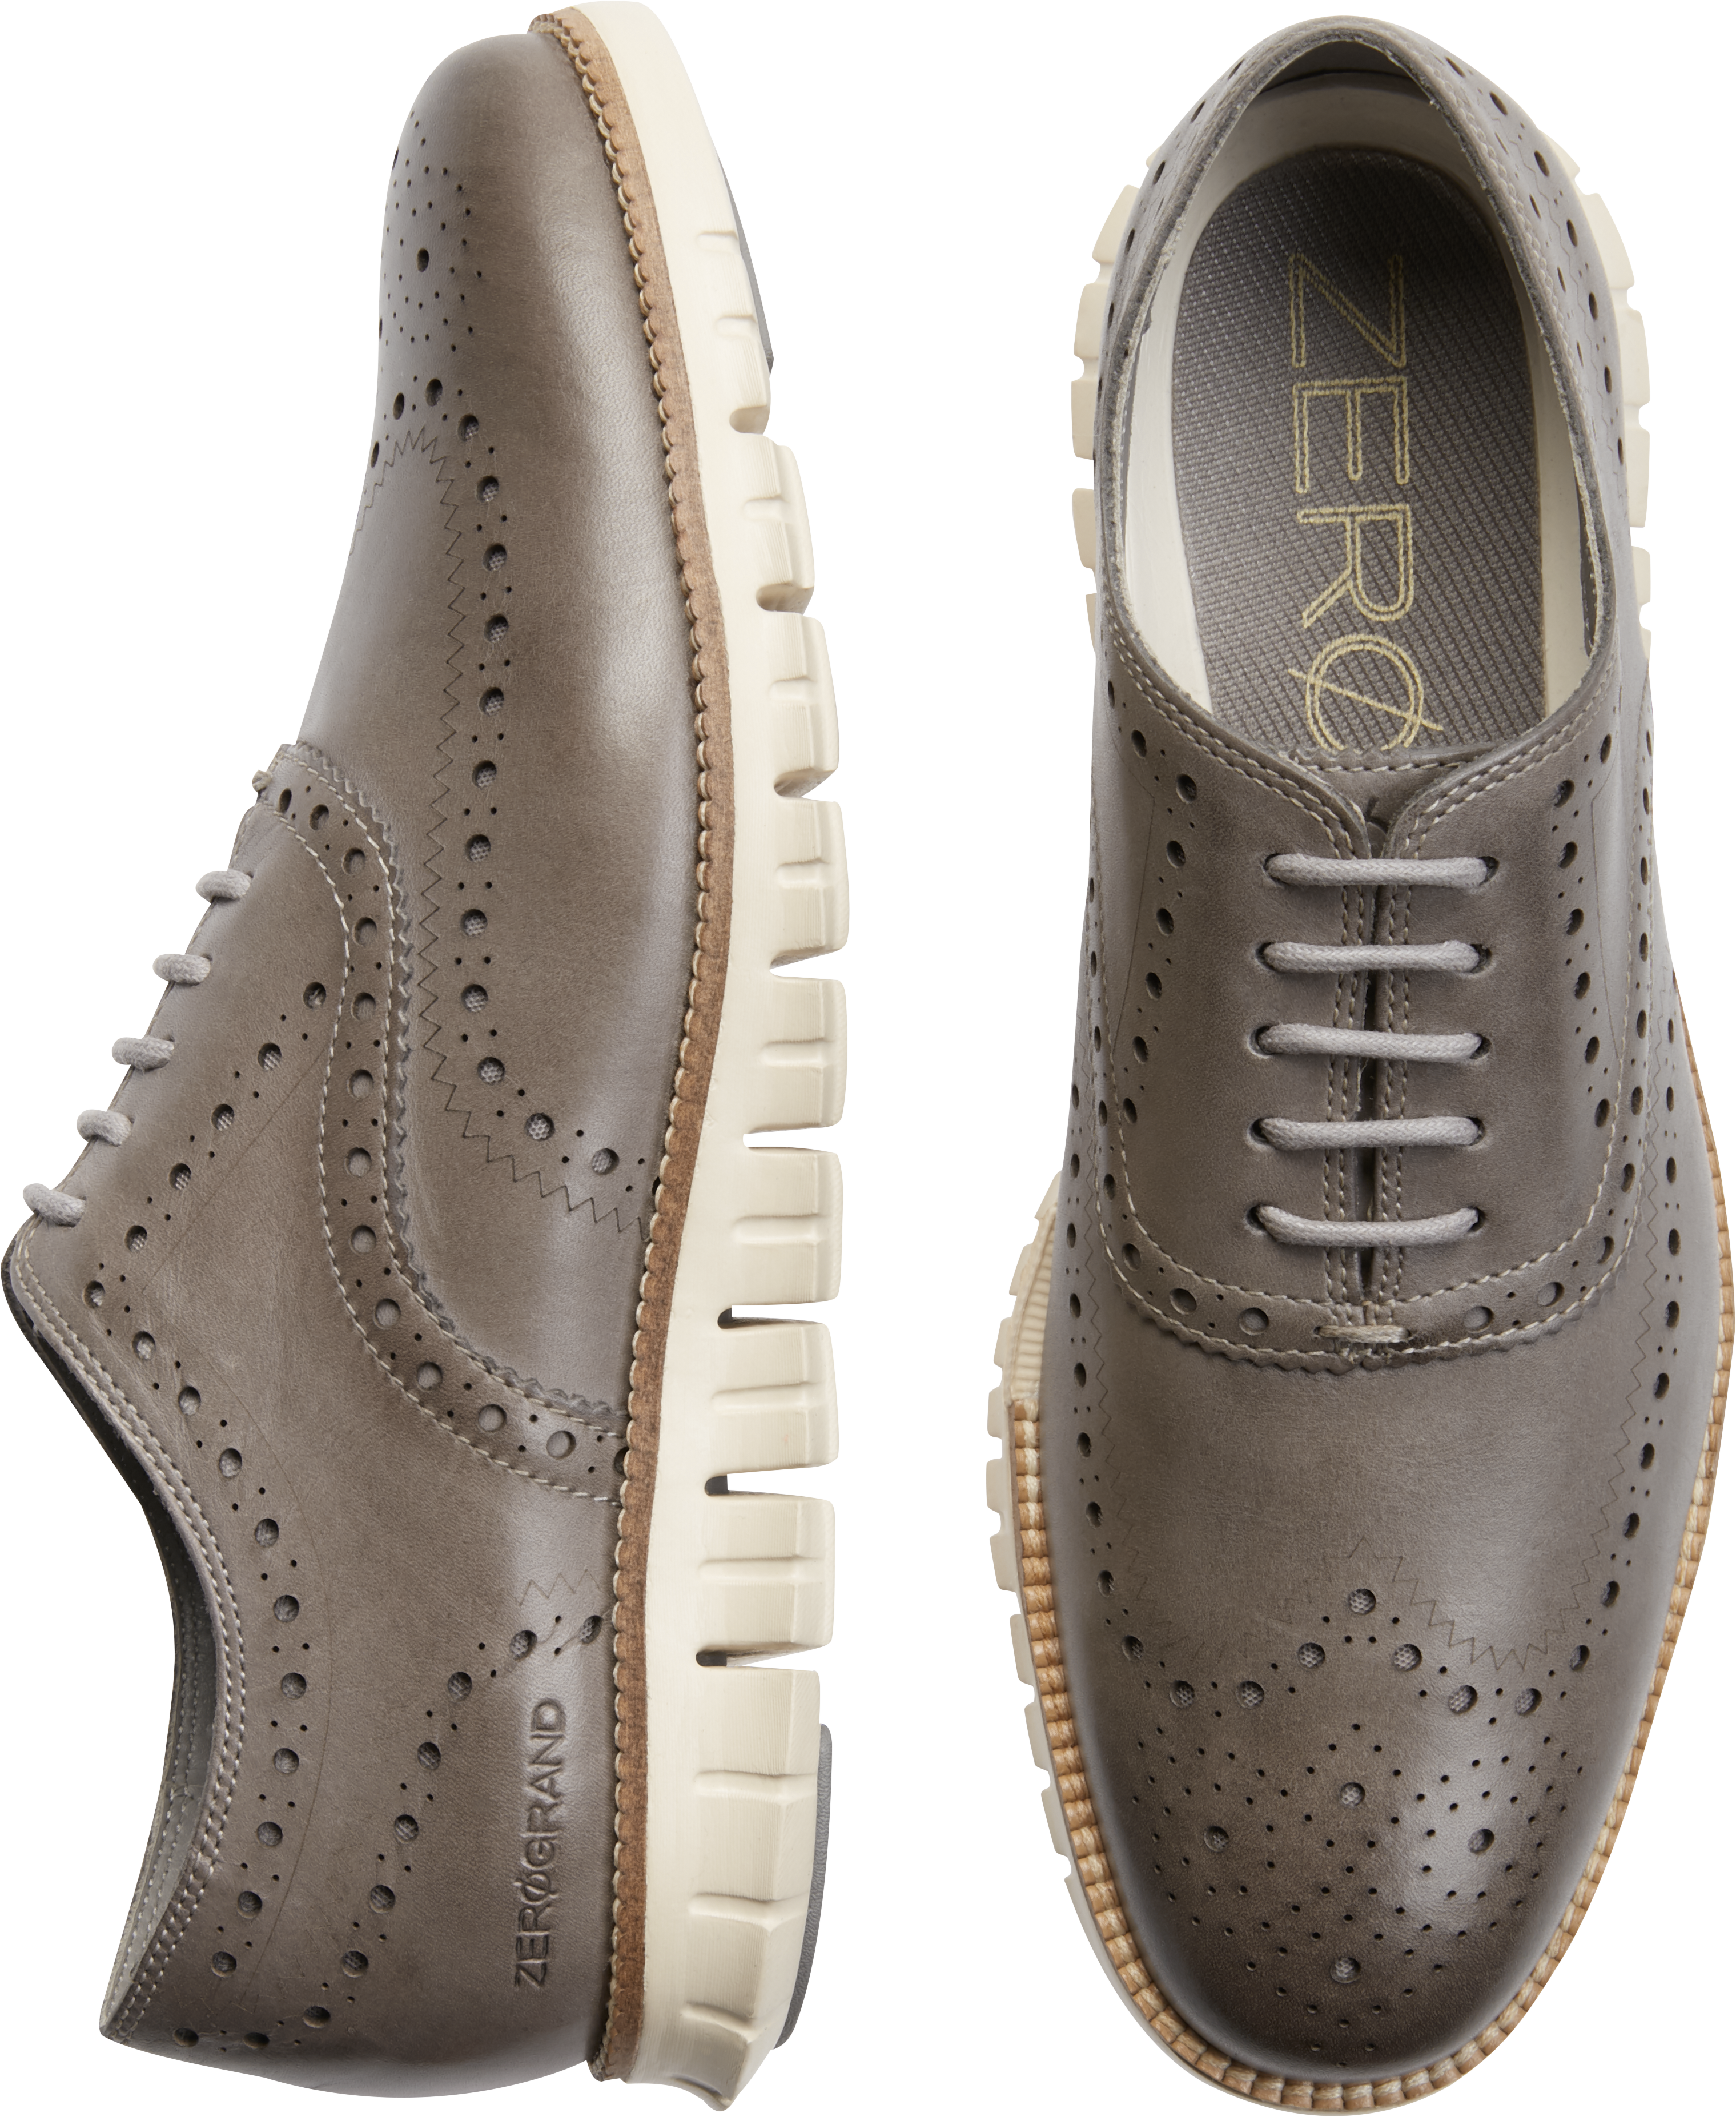 gray wingtip shoes